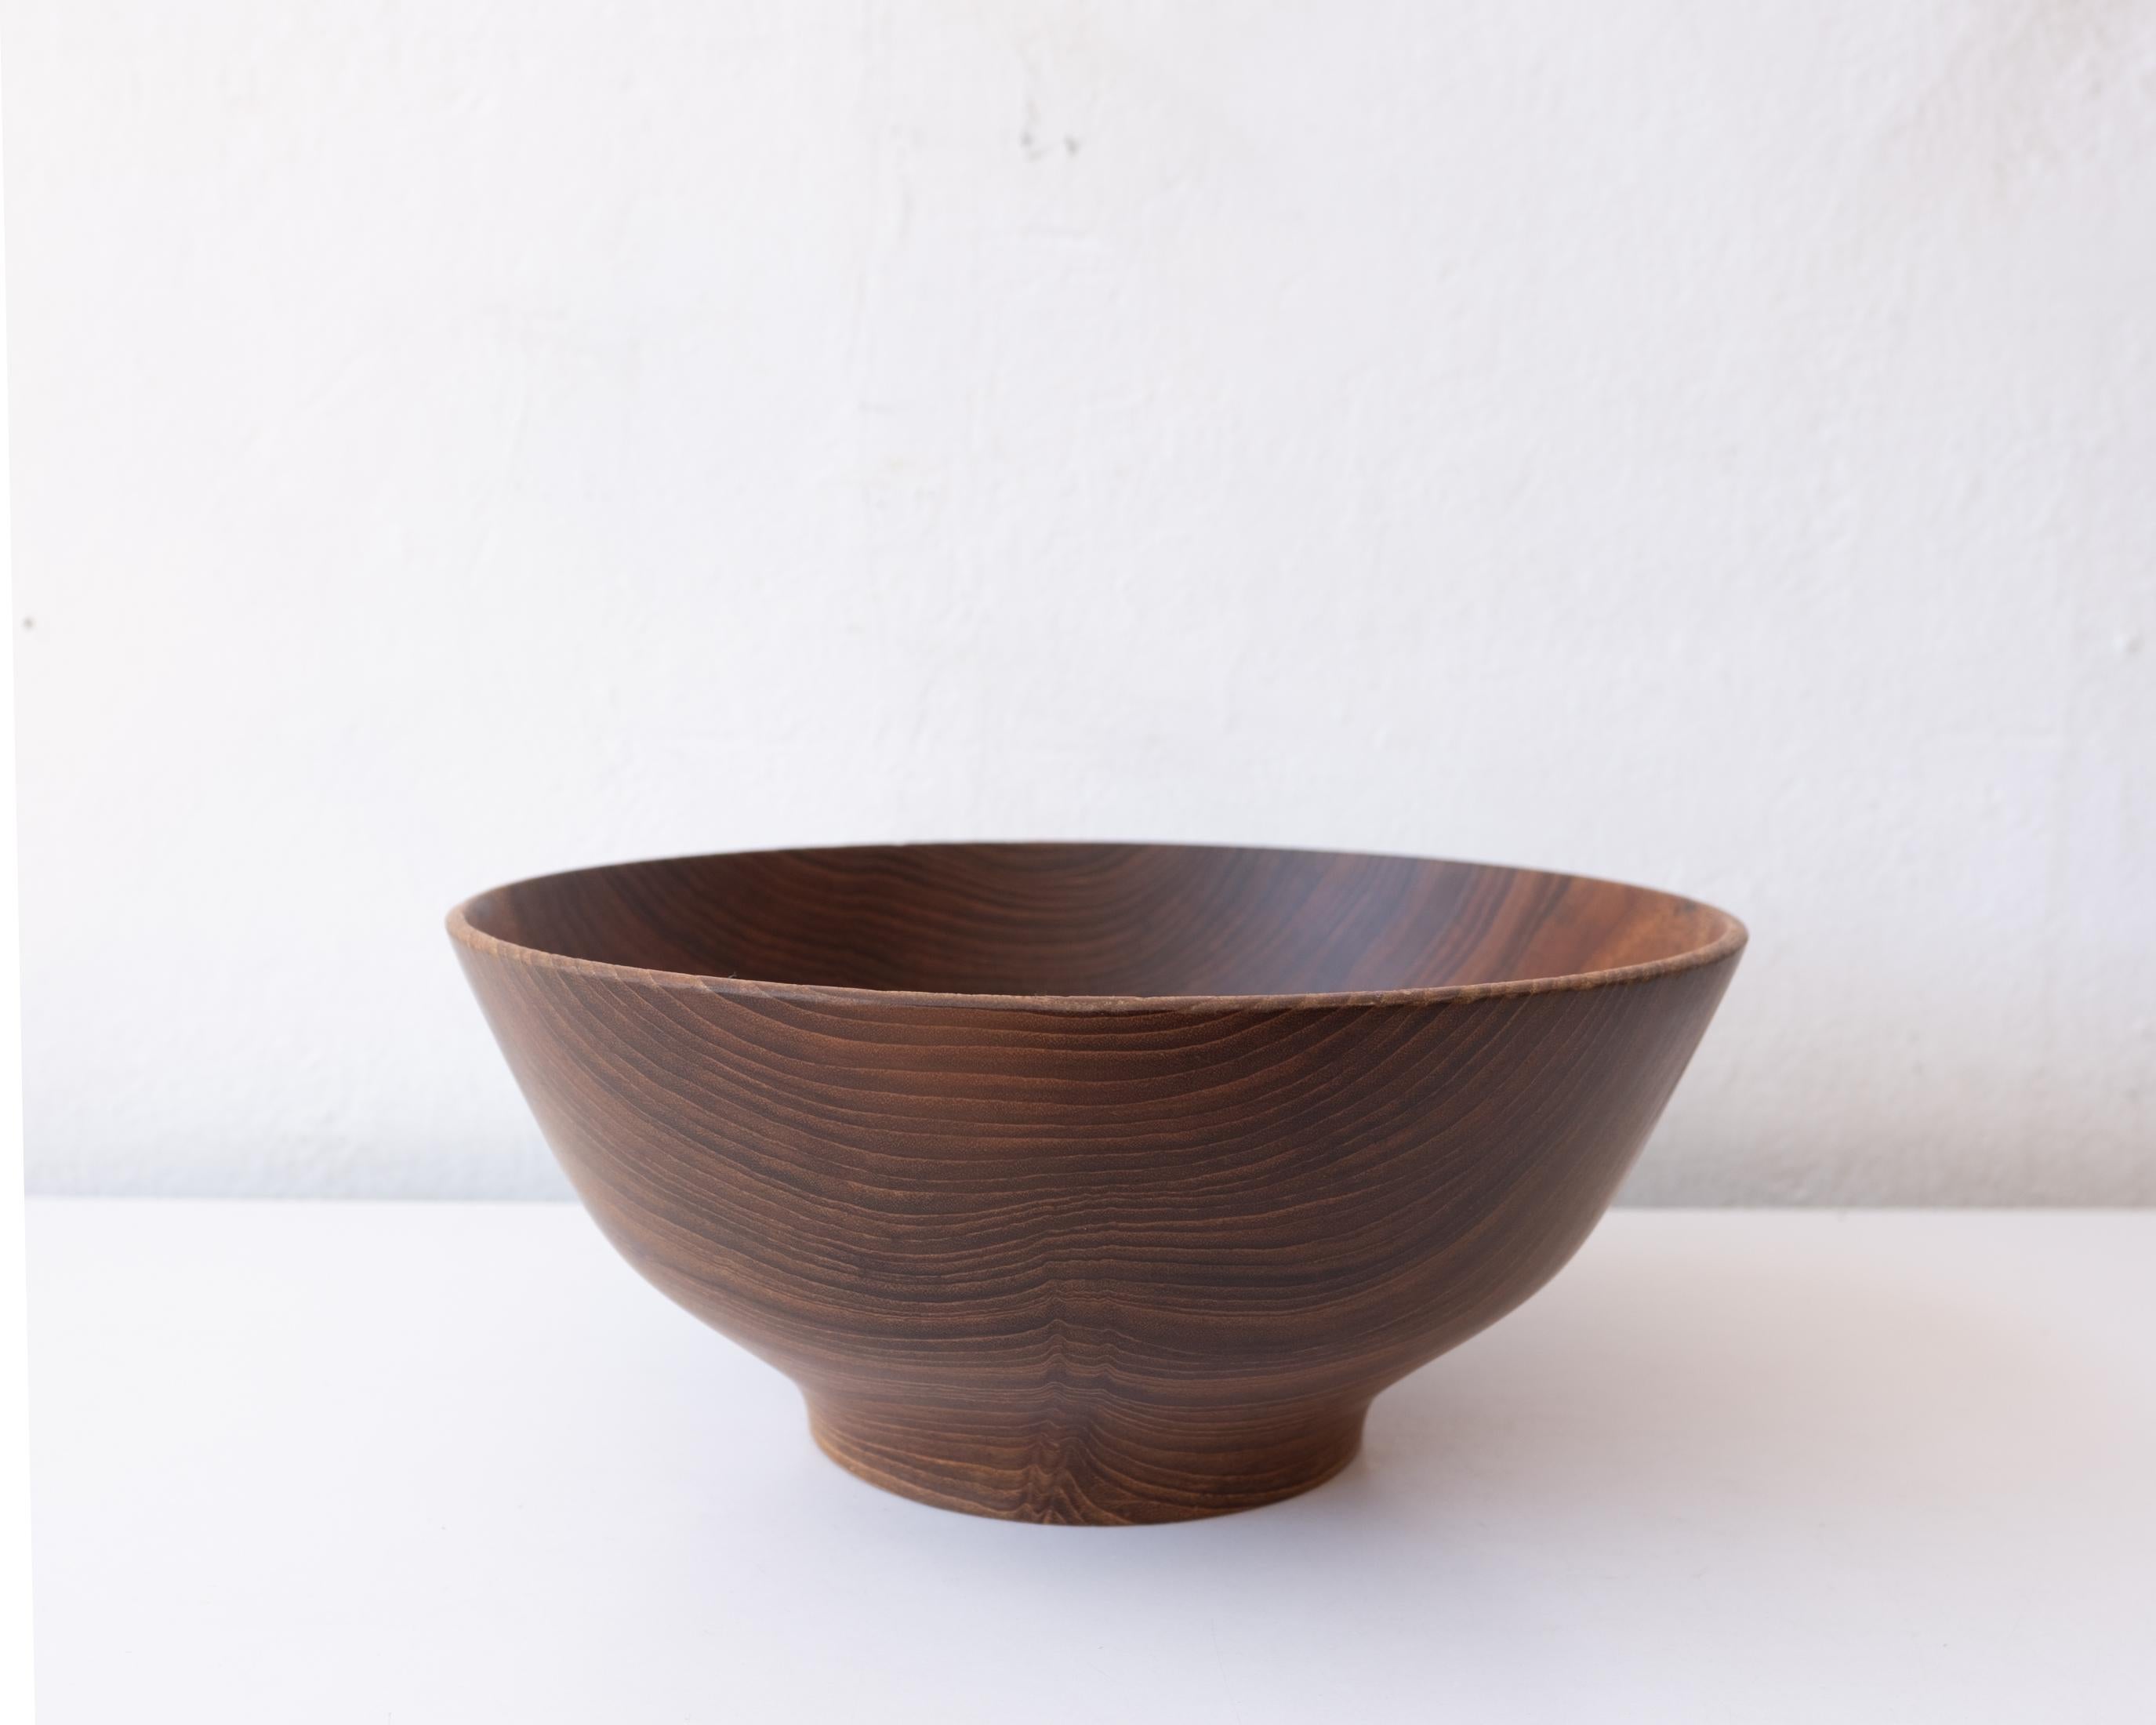 Studio Turned Teak Footed Bowl by Bob Stocksdale For Sale 3